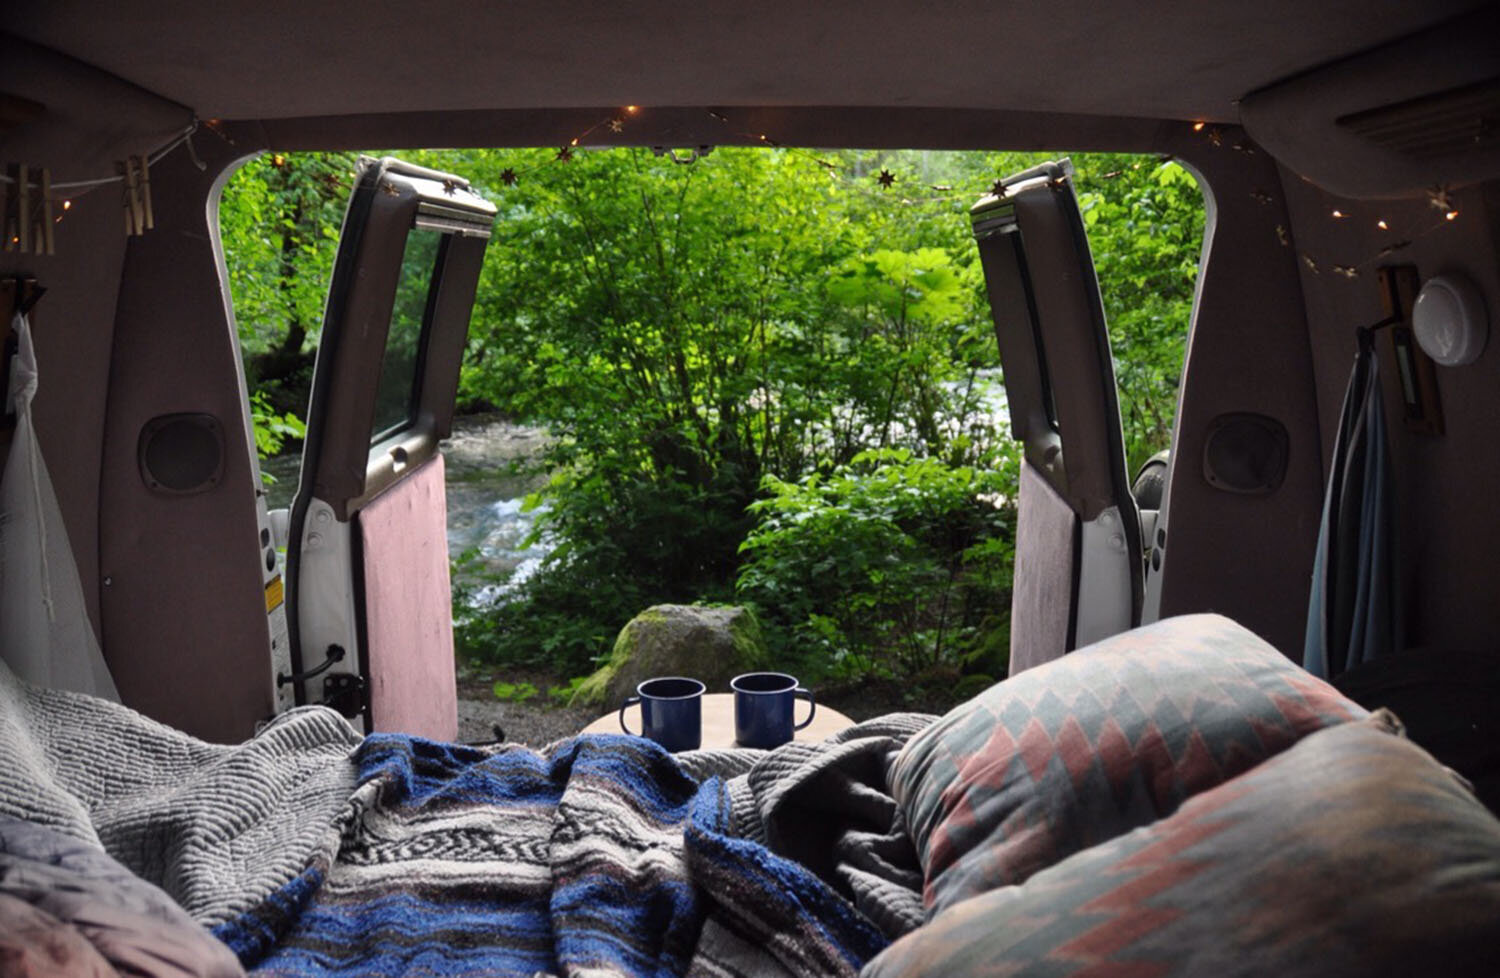 Campervan rentals: What does your vehicle come with?